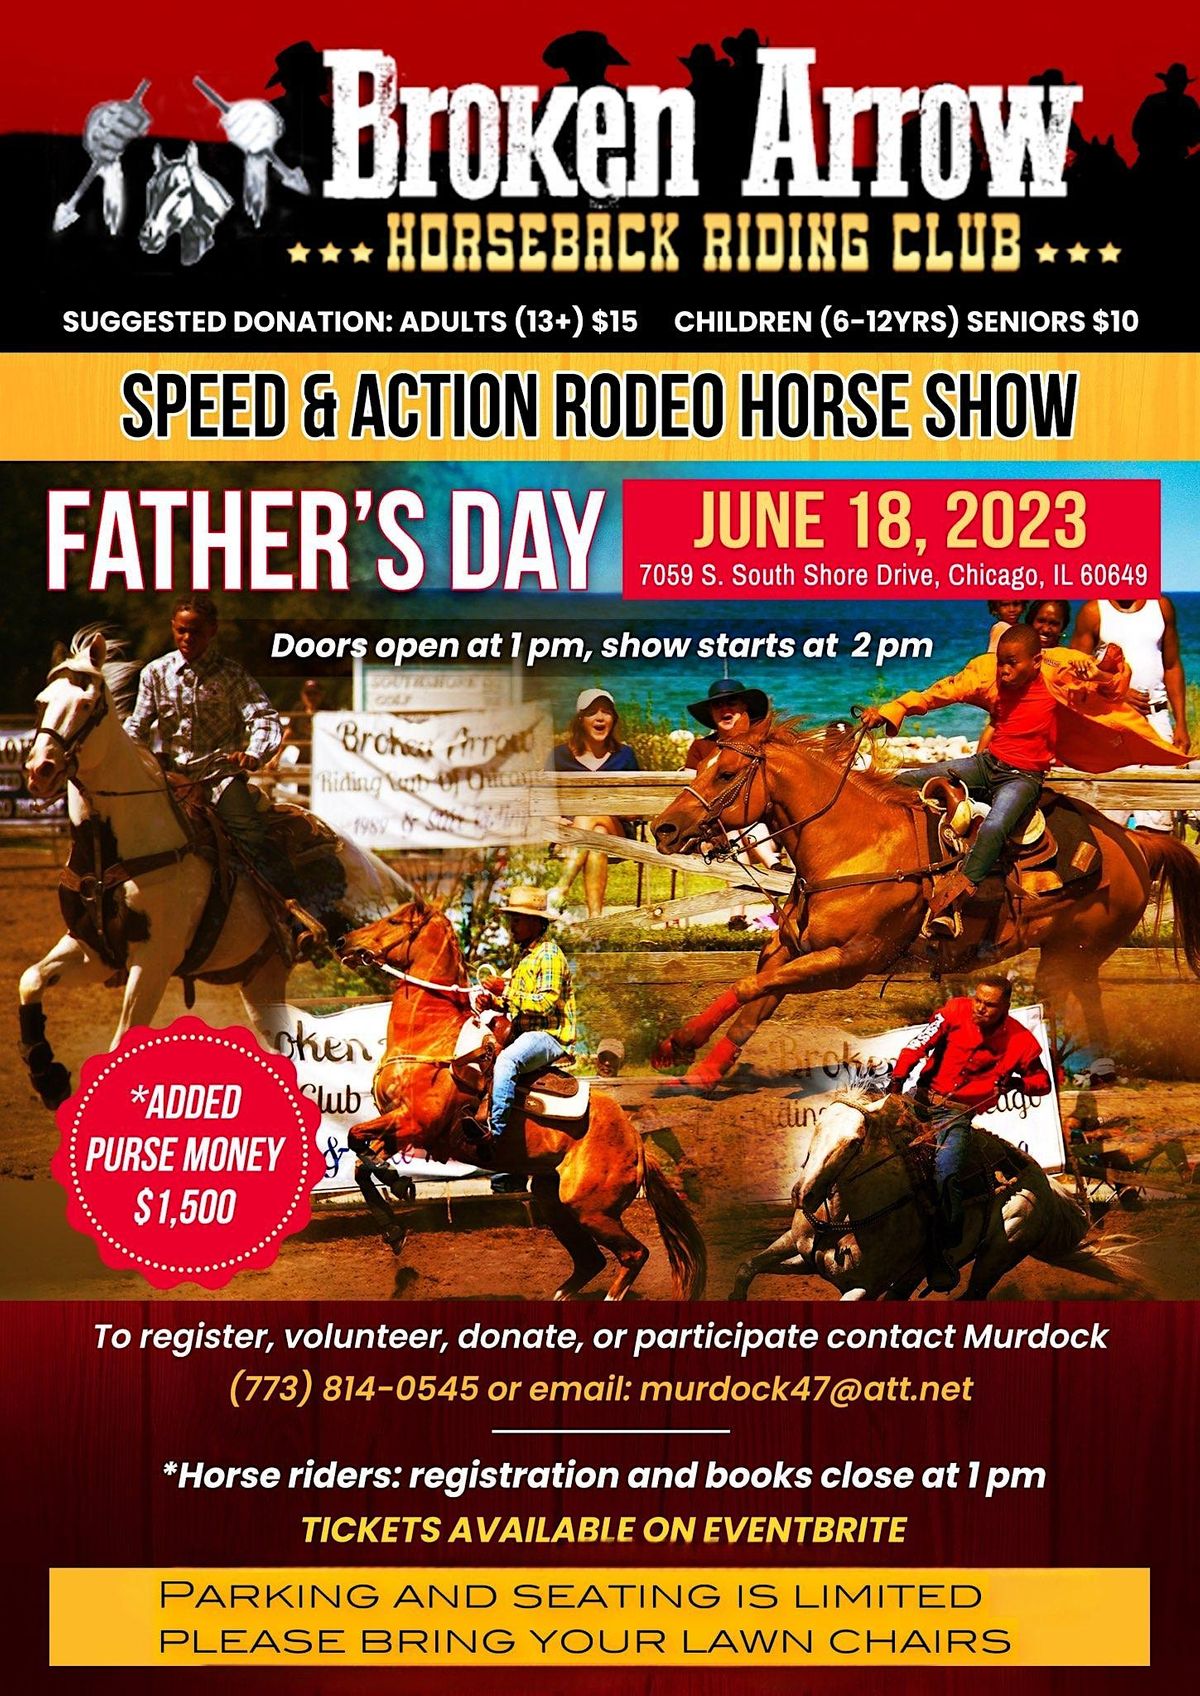 Annual Speed & Action Rodeo Horse Show